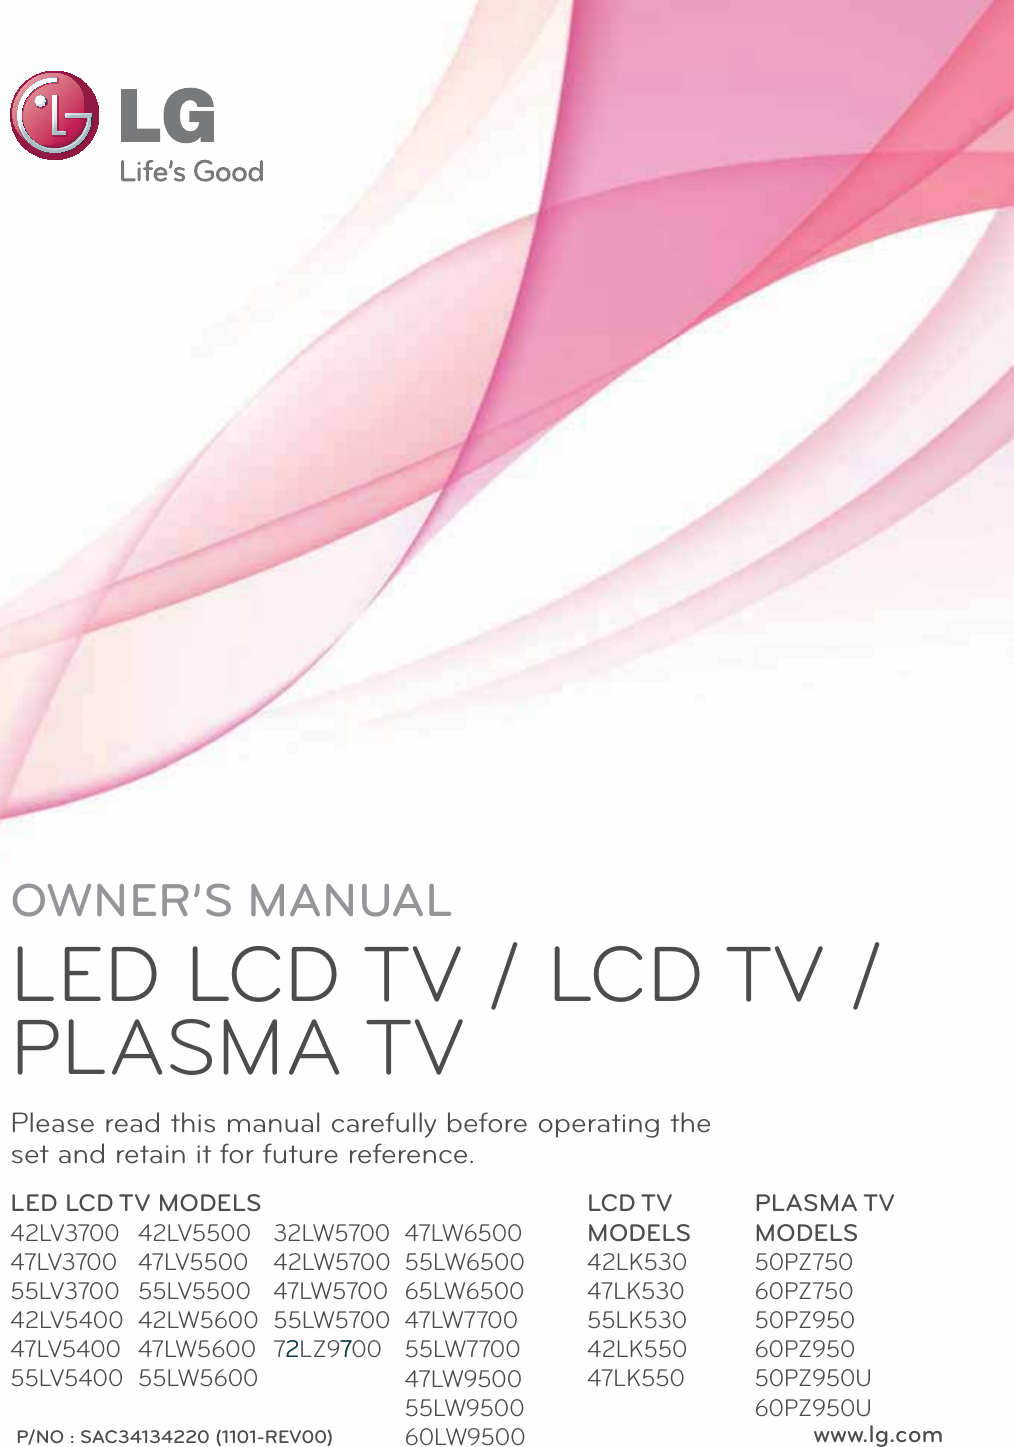 www.lg.comP/NO : SAC34134220 (1101-REV00)OWNER’S MANUALLED LCD TV / LCD TV / PLASMA TVPlease read this manual carefully before operating the set and retain it for future reference.LED LCD TV MODELS42LV370047LV370055LV370042LV540047LV540055LV5400LCD TV MODELS42LK53047LK53055LK53042LK55047LK550PLASMA TV MODELS50PZ75060PZ75050PZ95060PZ95050PZ950U60PZ950U42LV550047LV550055LV550042LW560047LW560055LW560032LW570042LW570047LW570055LW570072LZ970047LW650055LW650065LW650047LW770055LW770047LW950055LW950060LW950027